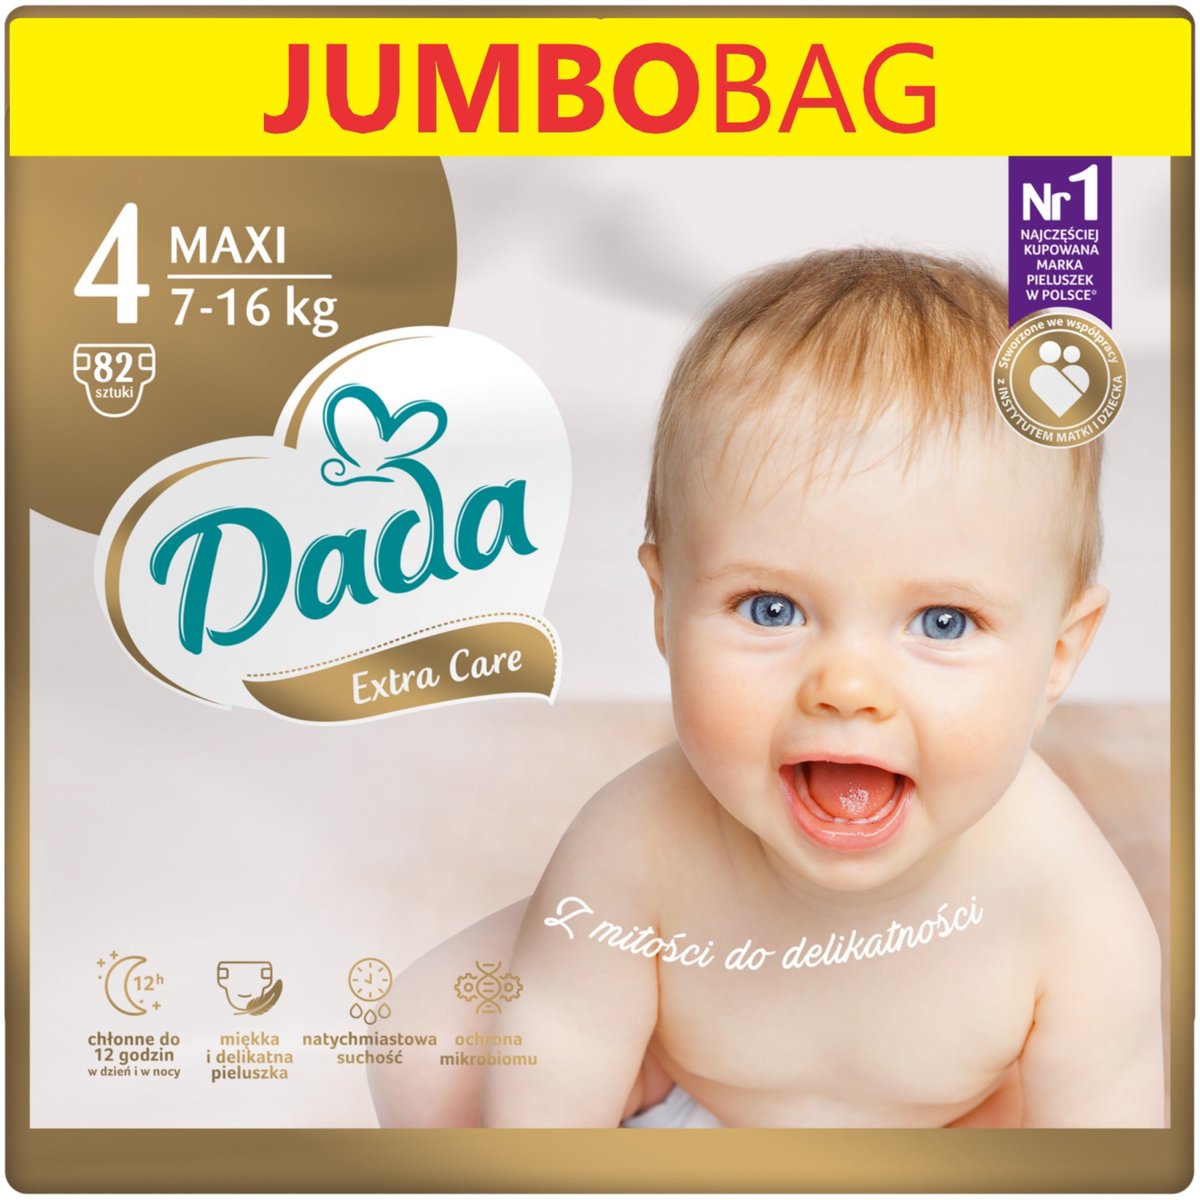 pampers new baby dry 2 144 szt